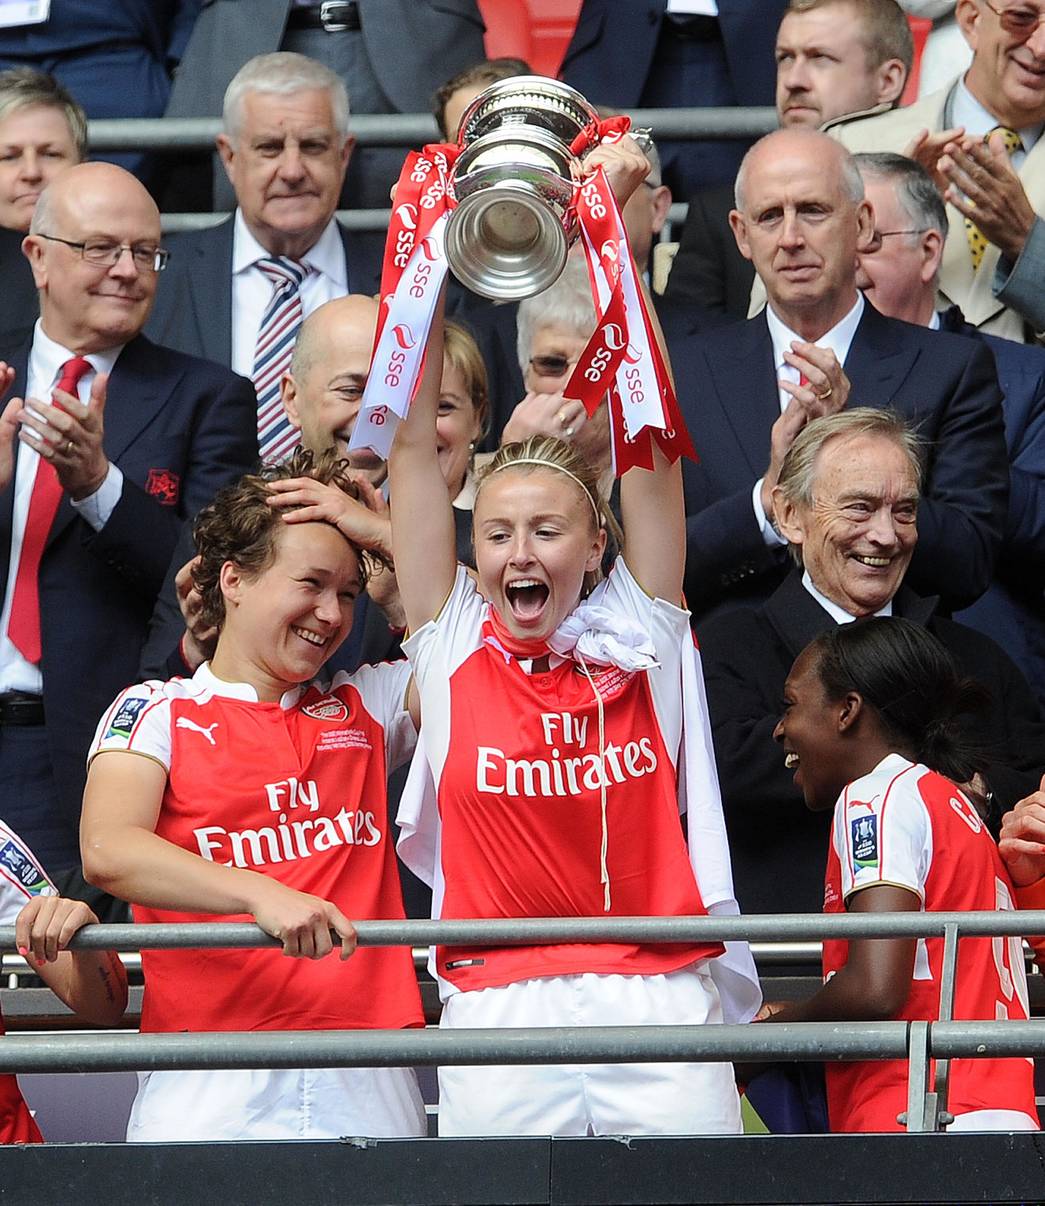 LONDON, ENGLAND - MAY 14: Leah Williamson of Arsenal Ladies lifts the FA Cup Trophy after the match between Arsenal Ladies and Chelsea Ladies at Wembley Stadium on May 14, 2016 in London, England. (Photo by David Price/Arsenal FC via Getty Images) *** Local Caption *** Leah Williamson